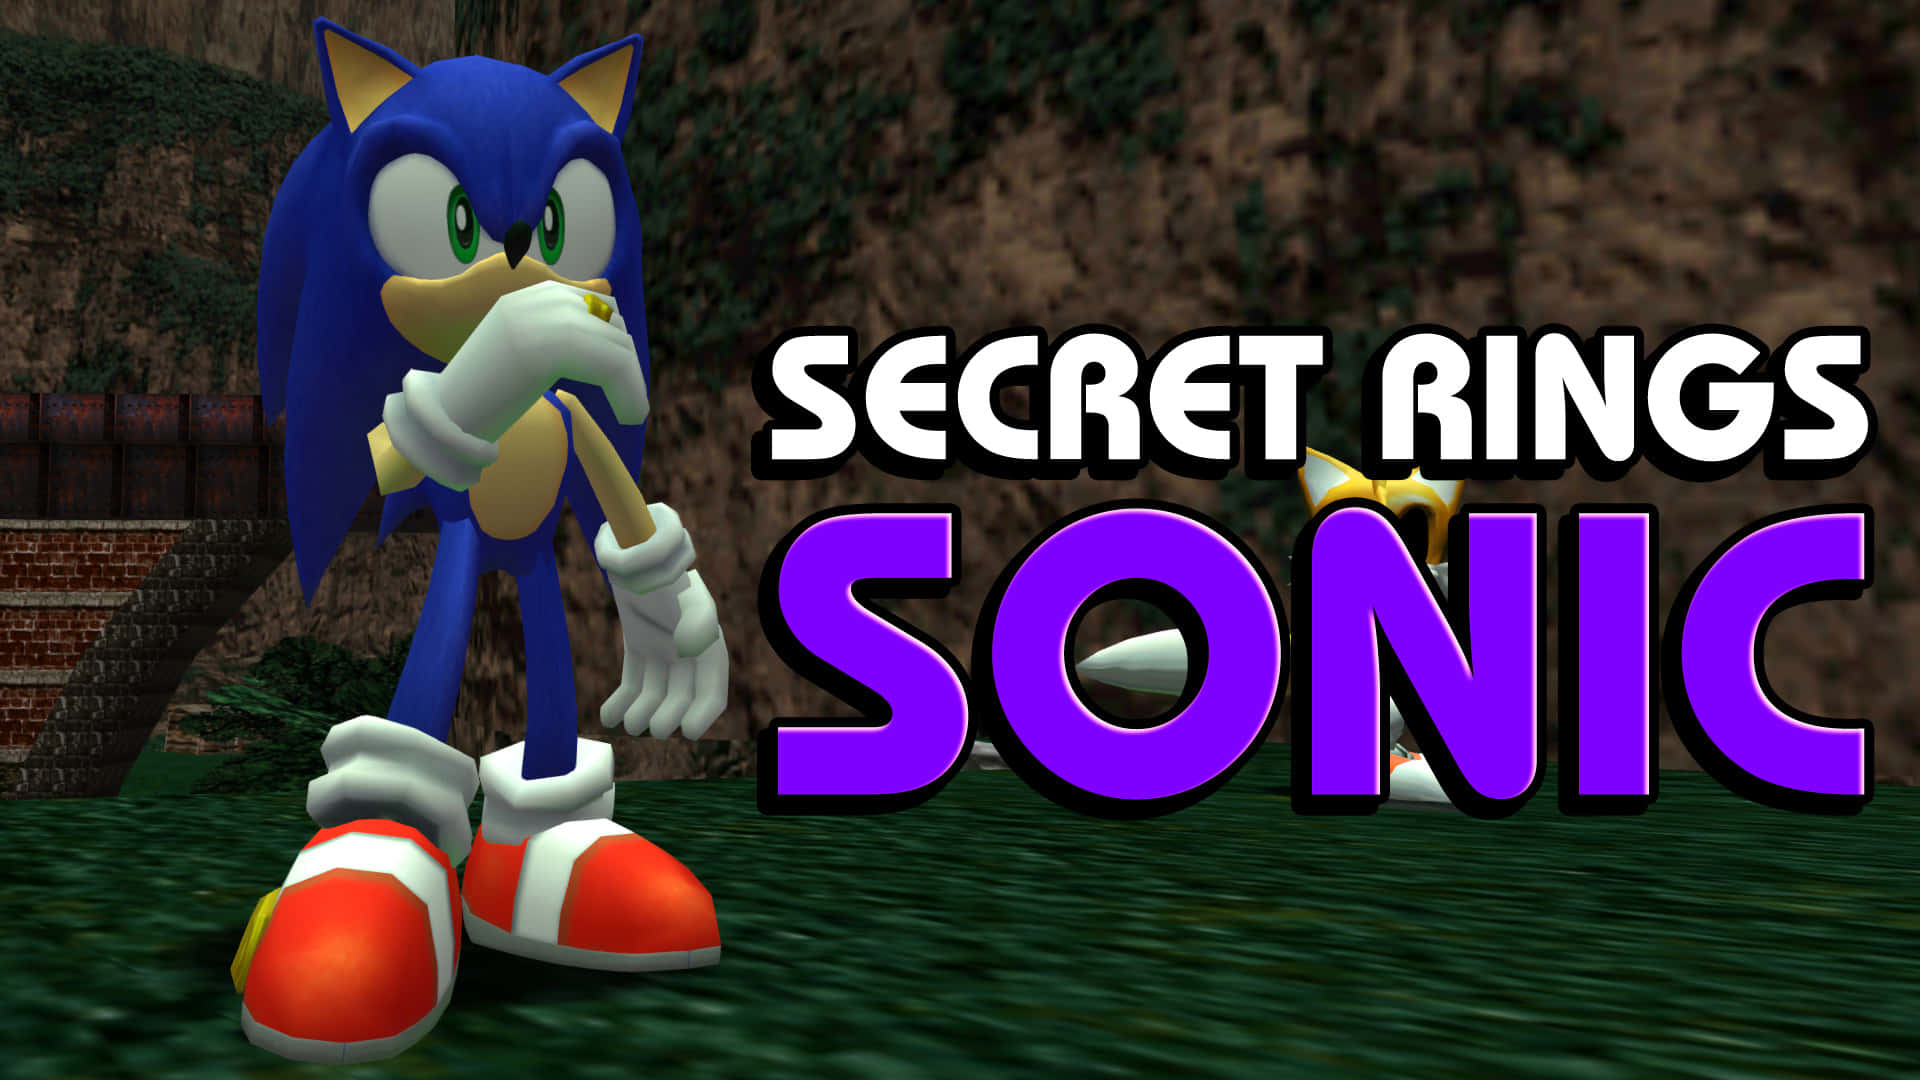 Sonic's Adventure in the Magical World of The Secret Rings Wallpaper